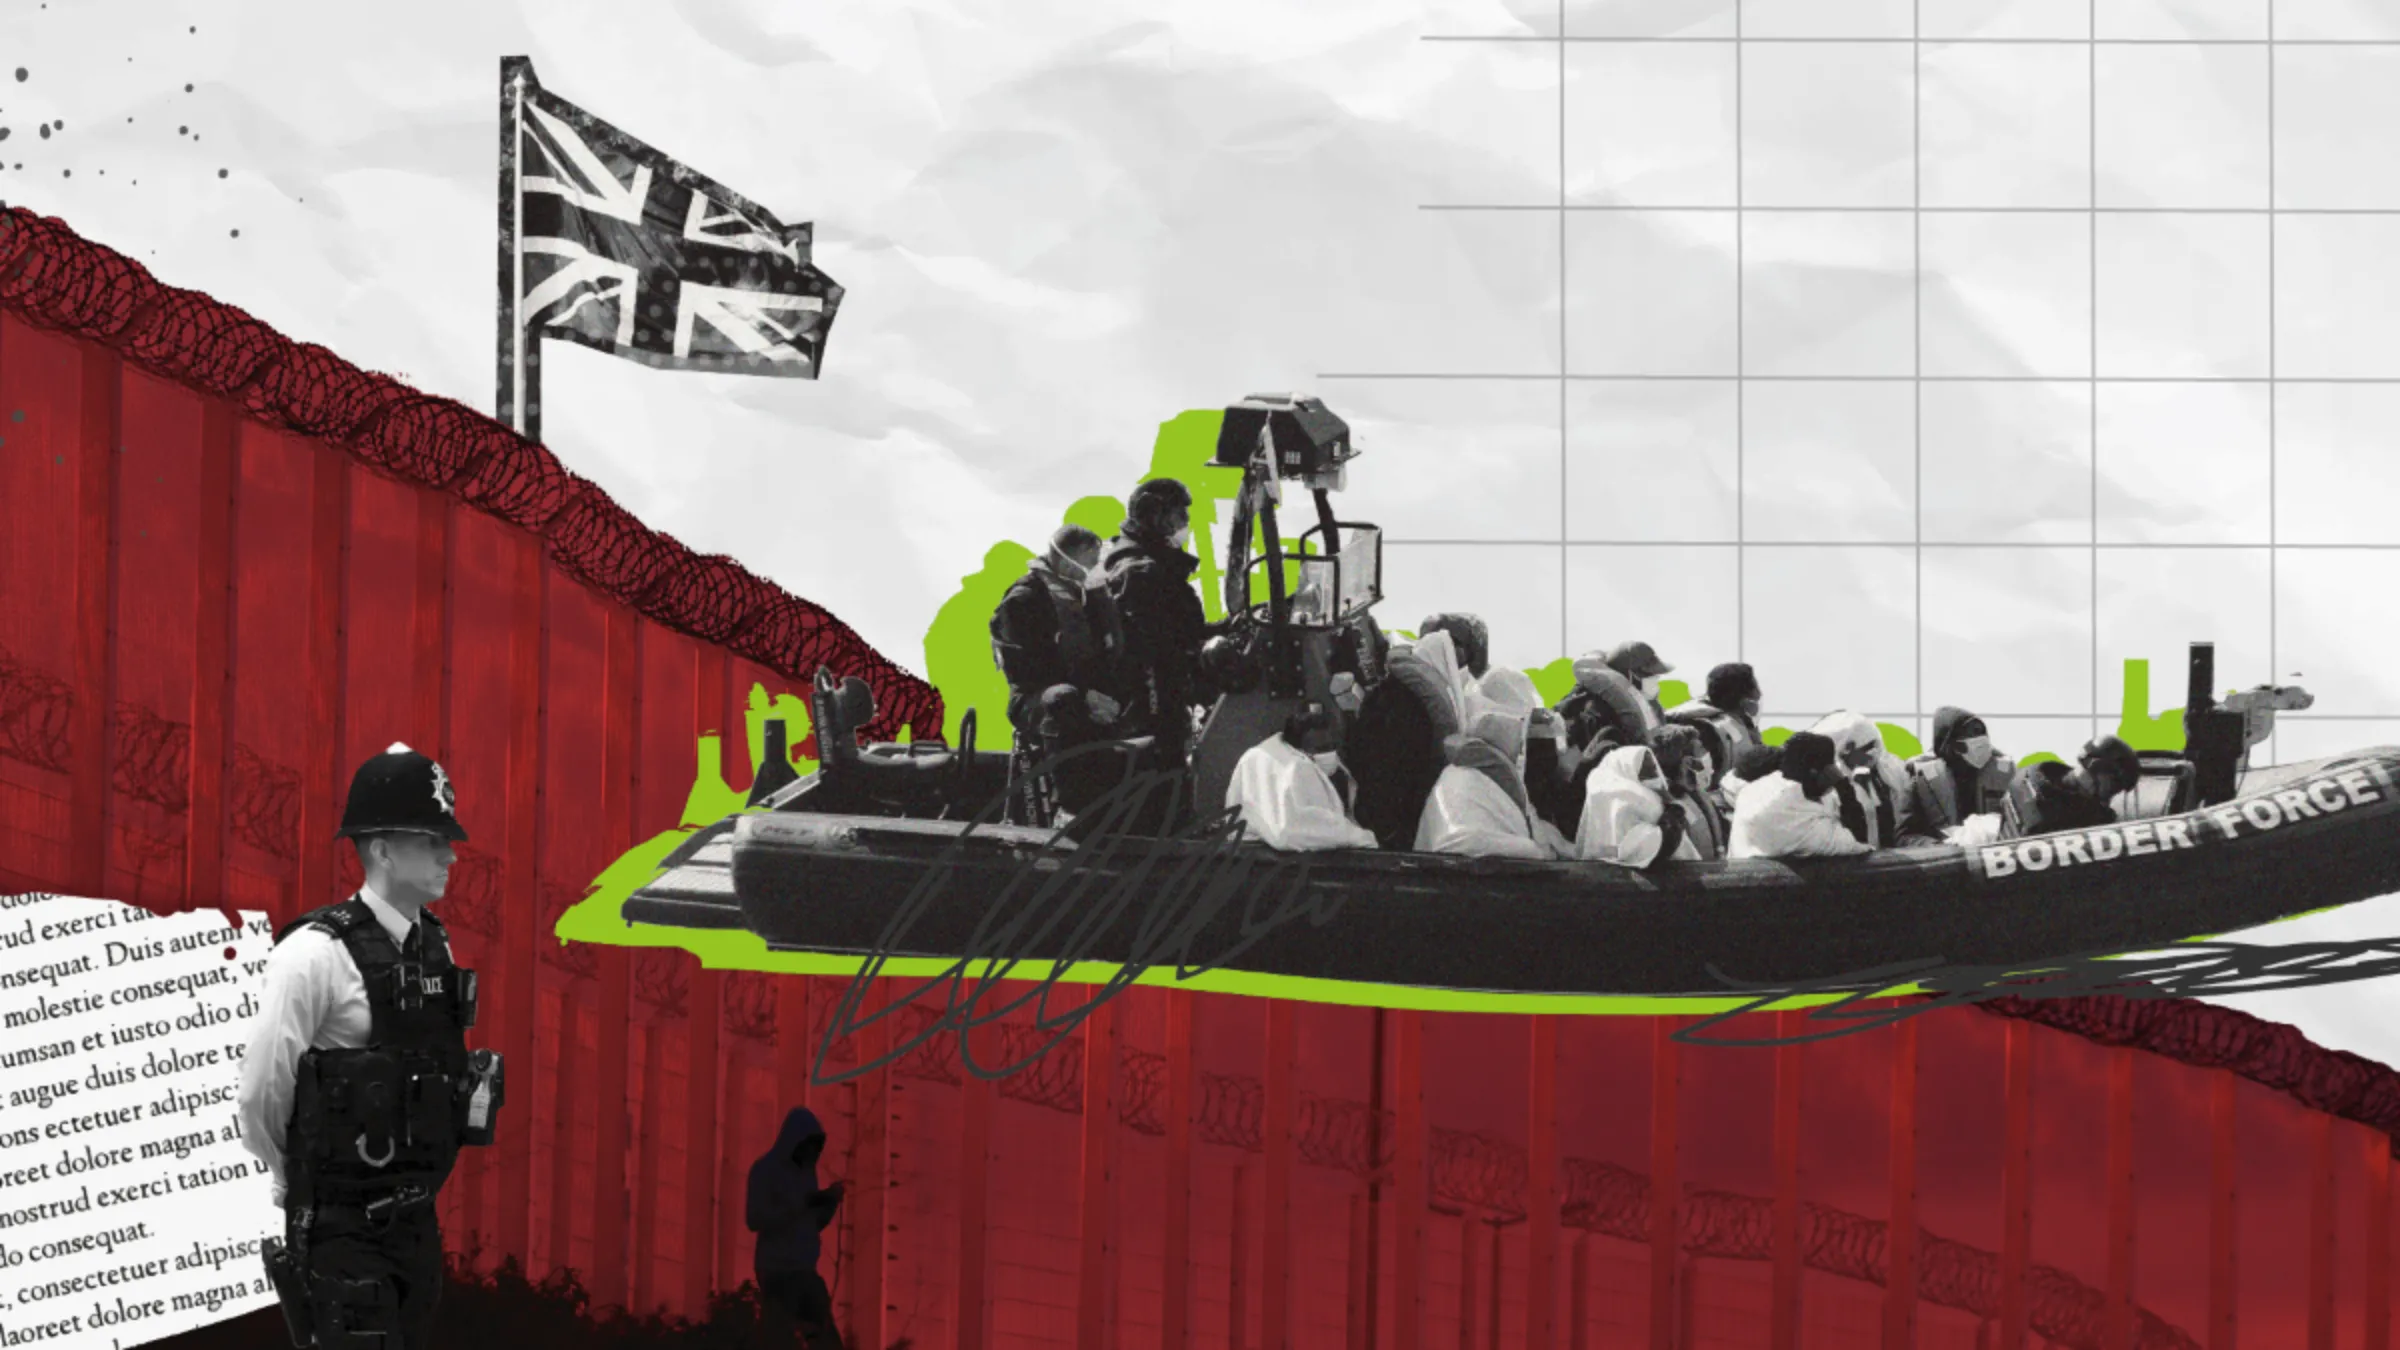 A British policeman is seen looking over a migrant boat as a Union Jack Flag waves in the background in this illustration. November 18, 2022